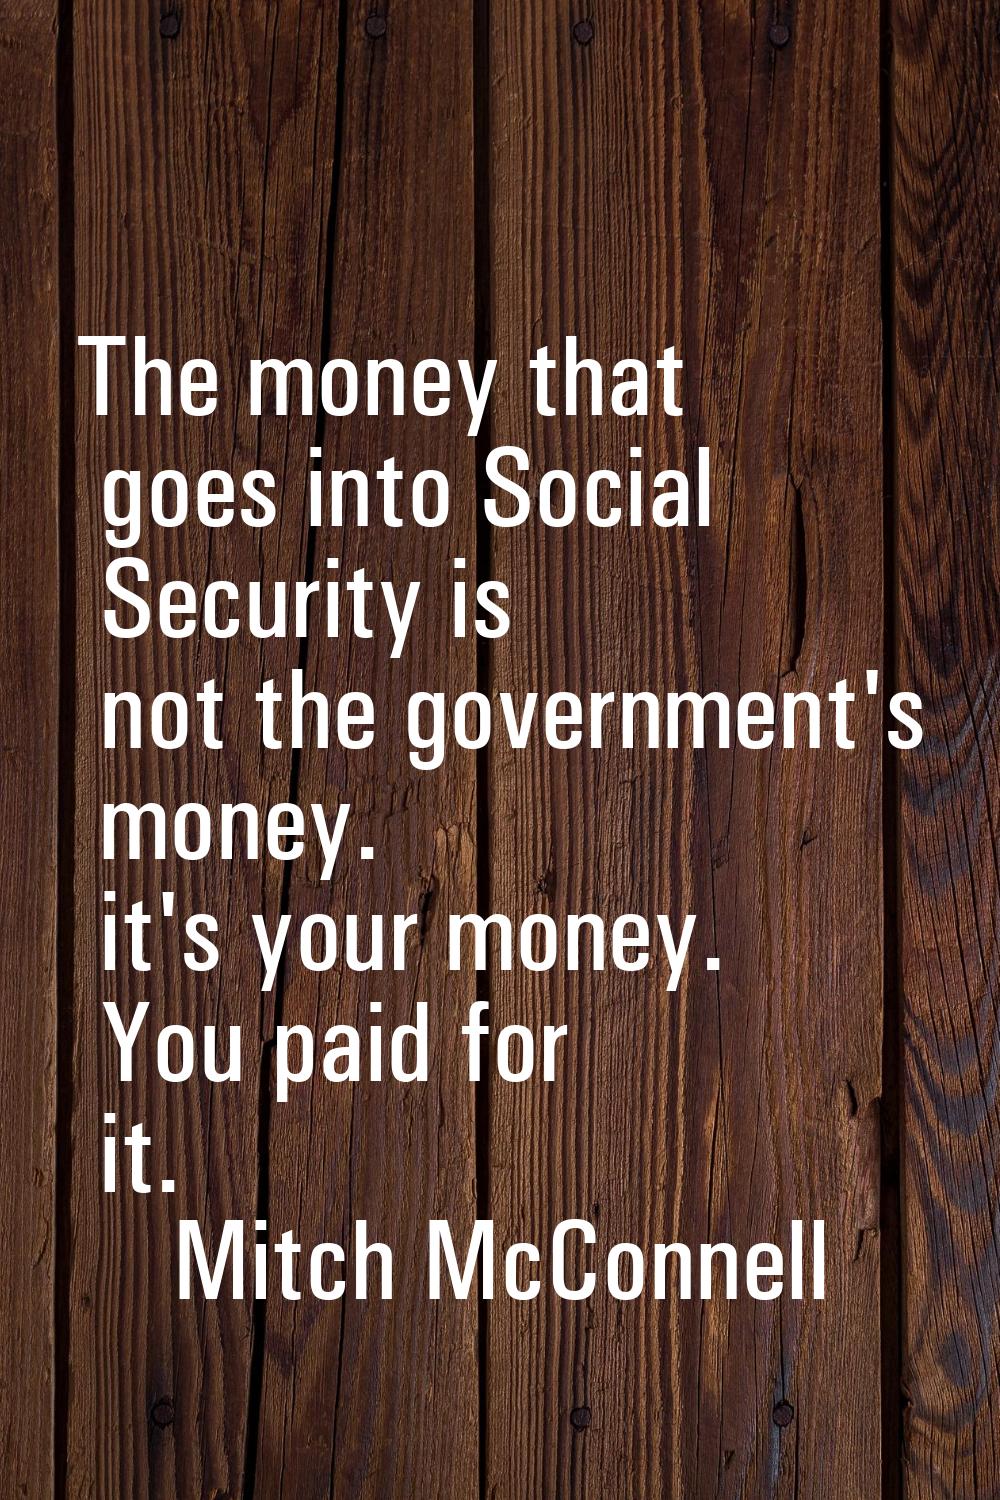 The money that goes into Social Security is not the government's money. it's your money. You paid f